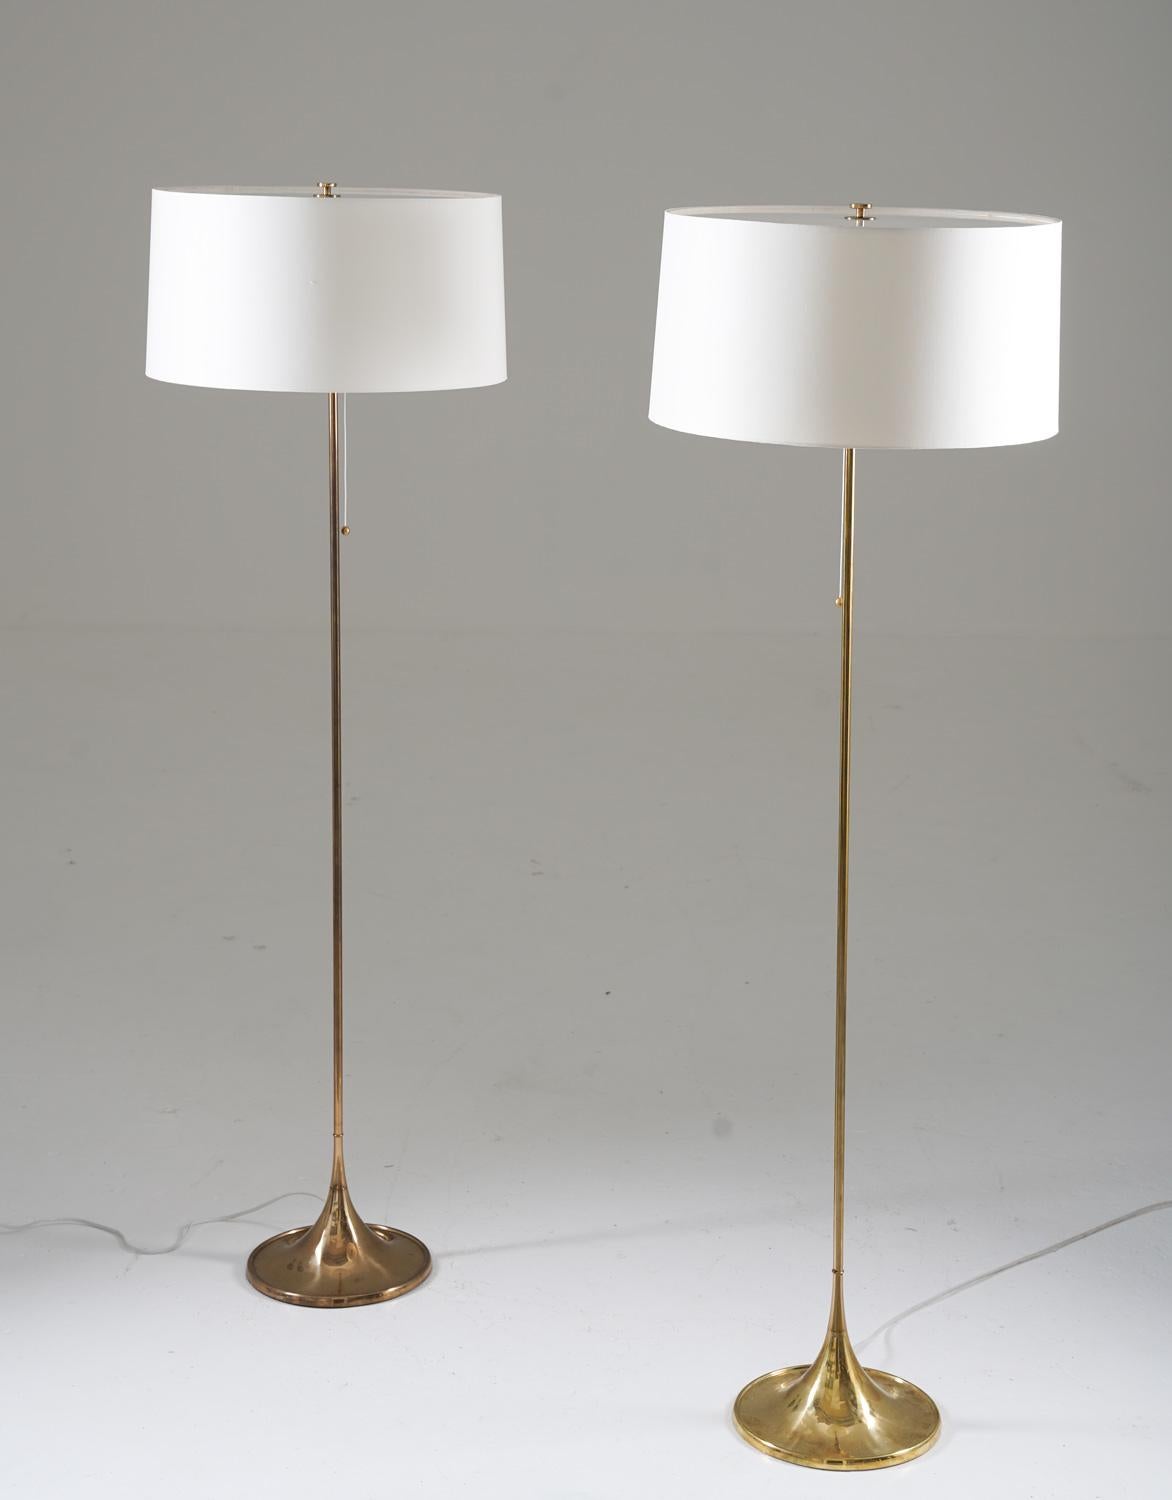 Pair of Scandinavian floor lamps by Alf Svensson and Yngvar Sandström, Sweden, 1970s.
The lamps are made of solid brass with a trumpet-shaped foot. They come with their original shades that has been reupholstered in a cream-white chintz